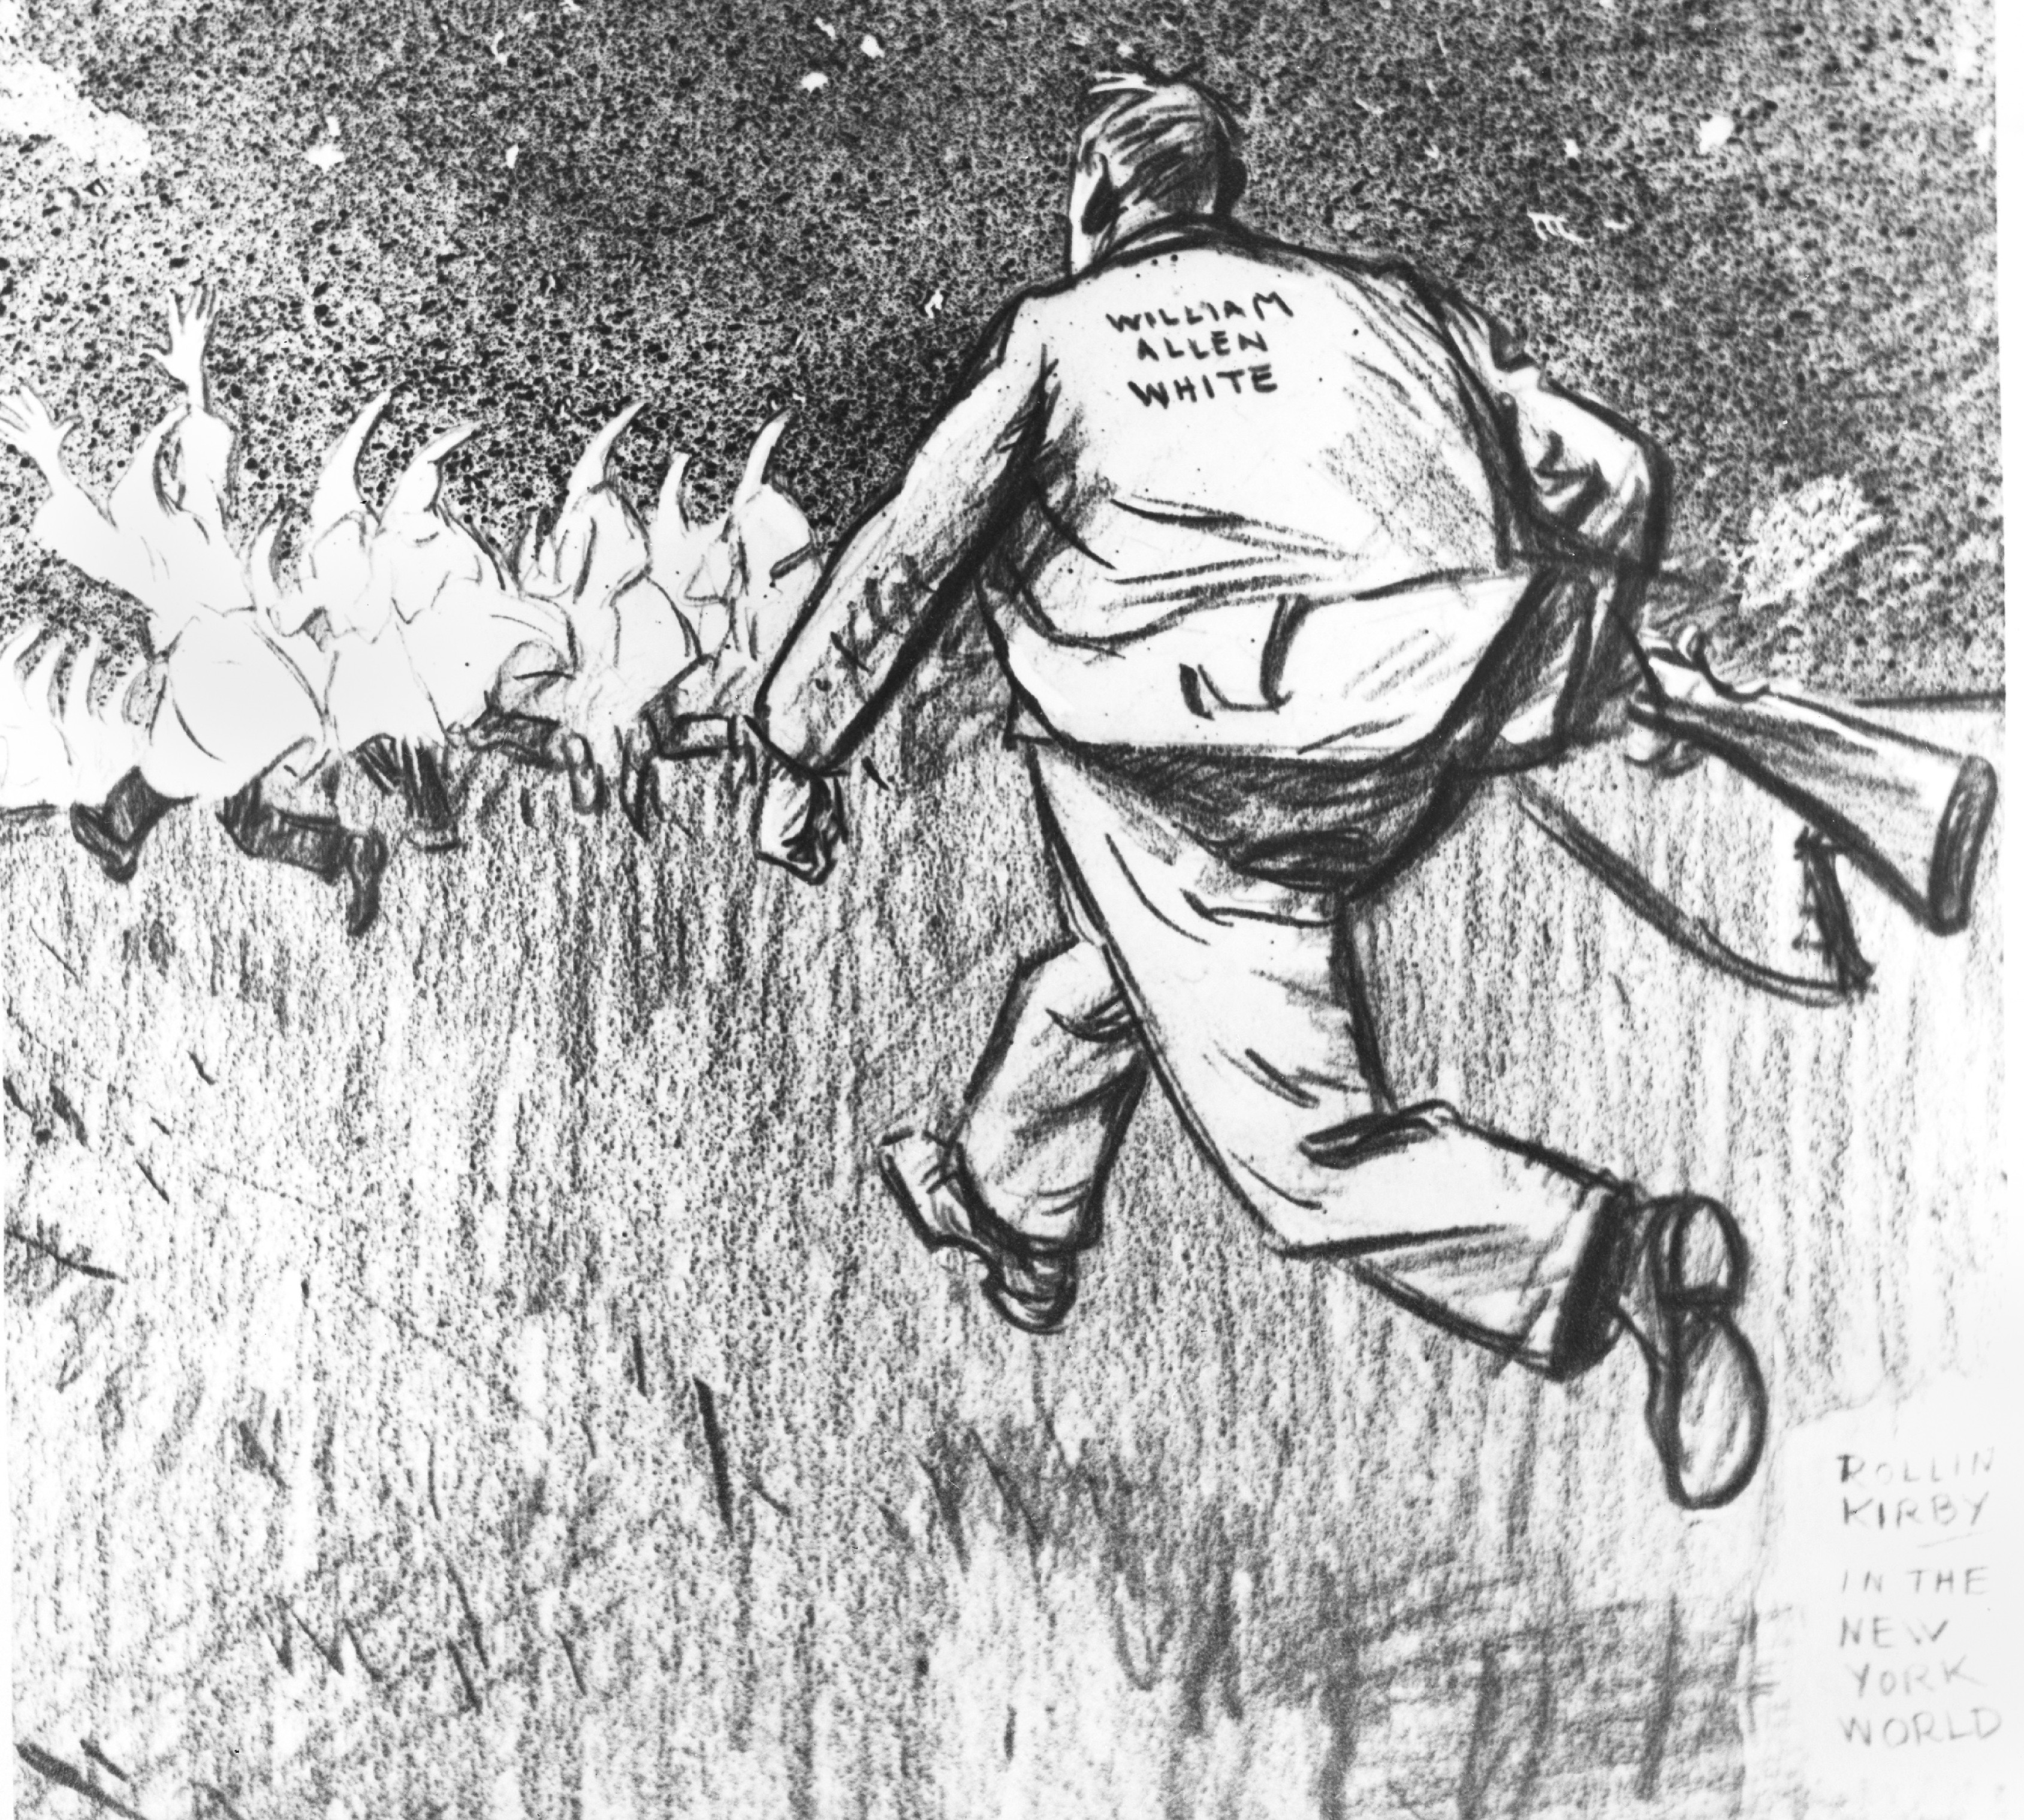 William Allen White and the KKK in Kansas: "A Real American Goes Hunting" Event Image